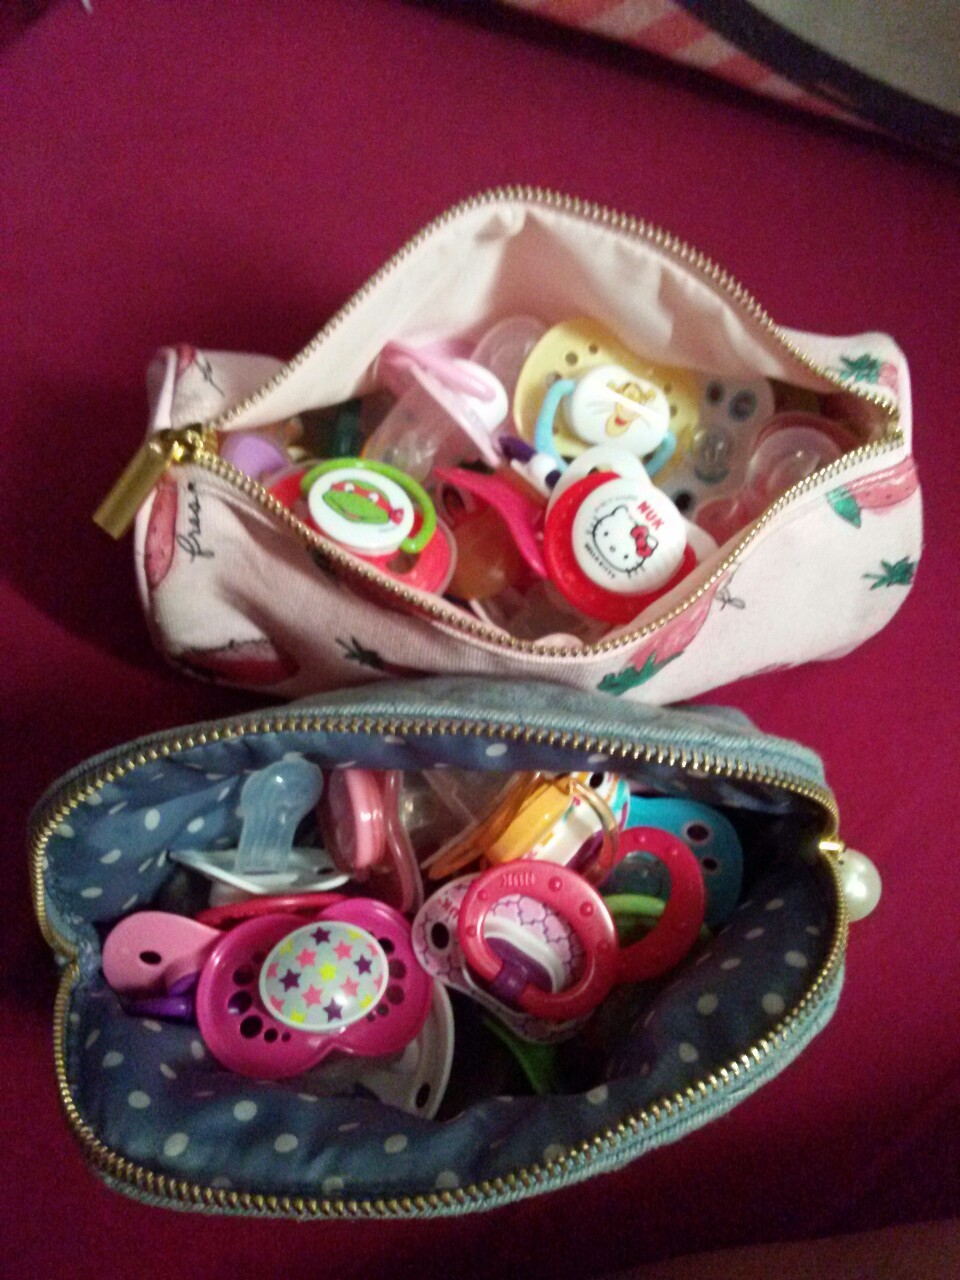 softnlittle:  I had to add an extra bag just for my 53 pacis !!